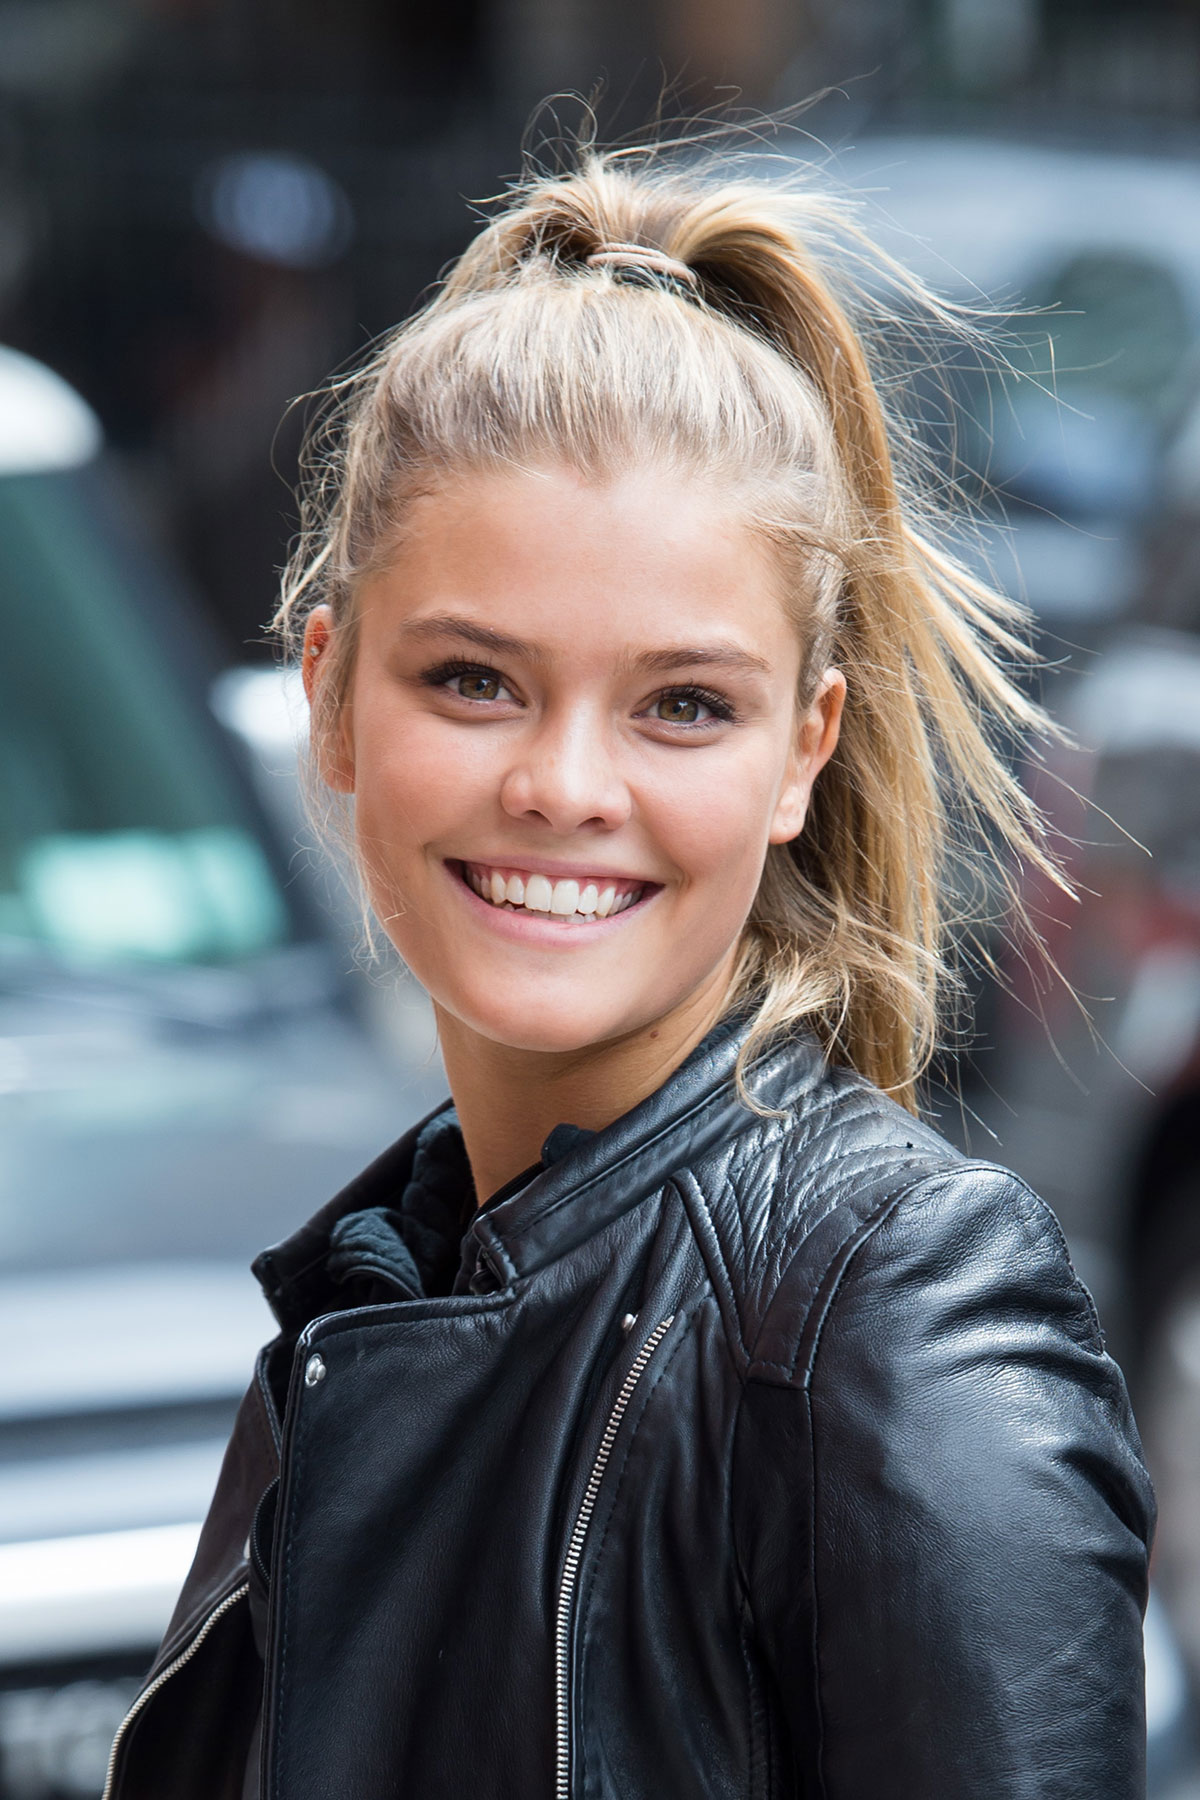 Nina Agdal on the streets of Manhattan